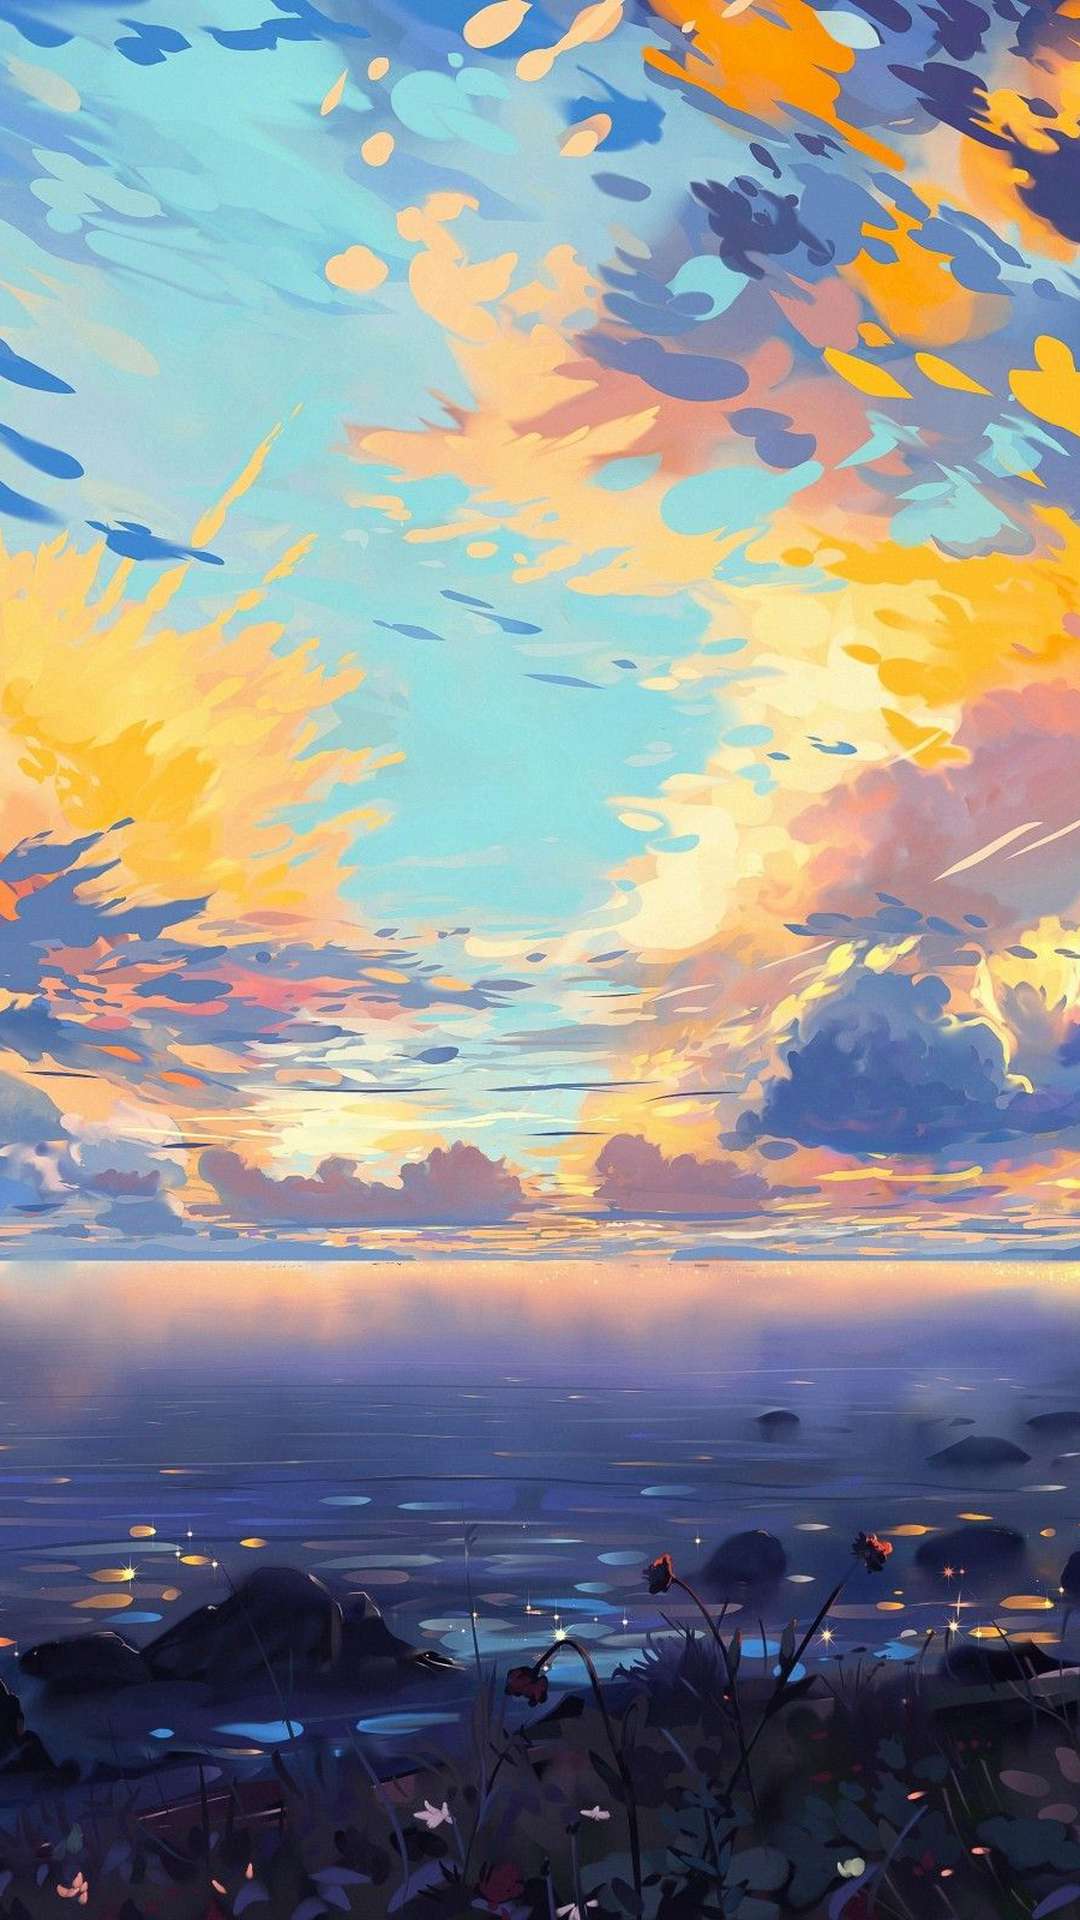 240+ Anime Landscape HD Wallpapers and Backgrounds